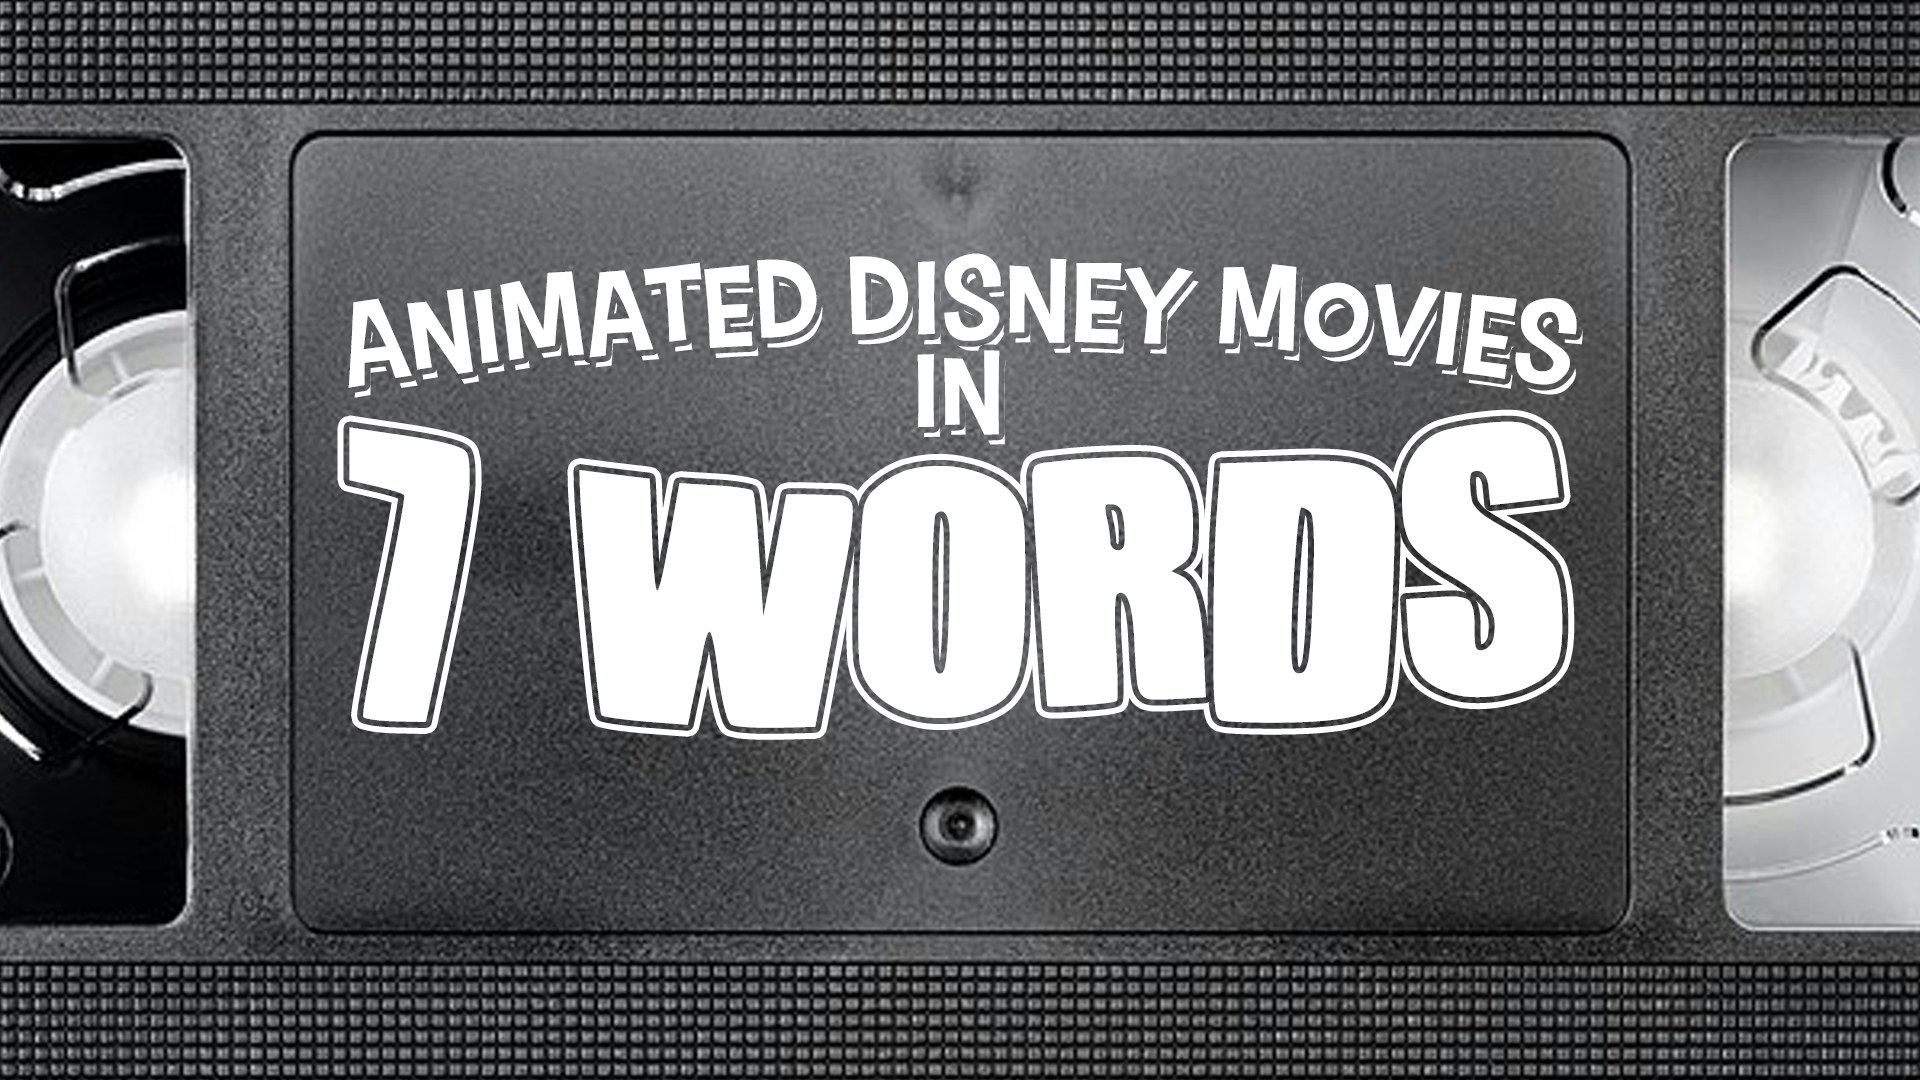 name that movie disney animated movies in 7 words.jpg?auto=compress%2Cformat&ixlib=php 1.2